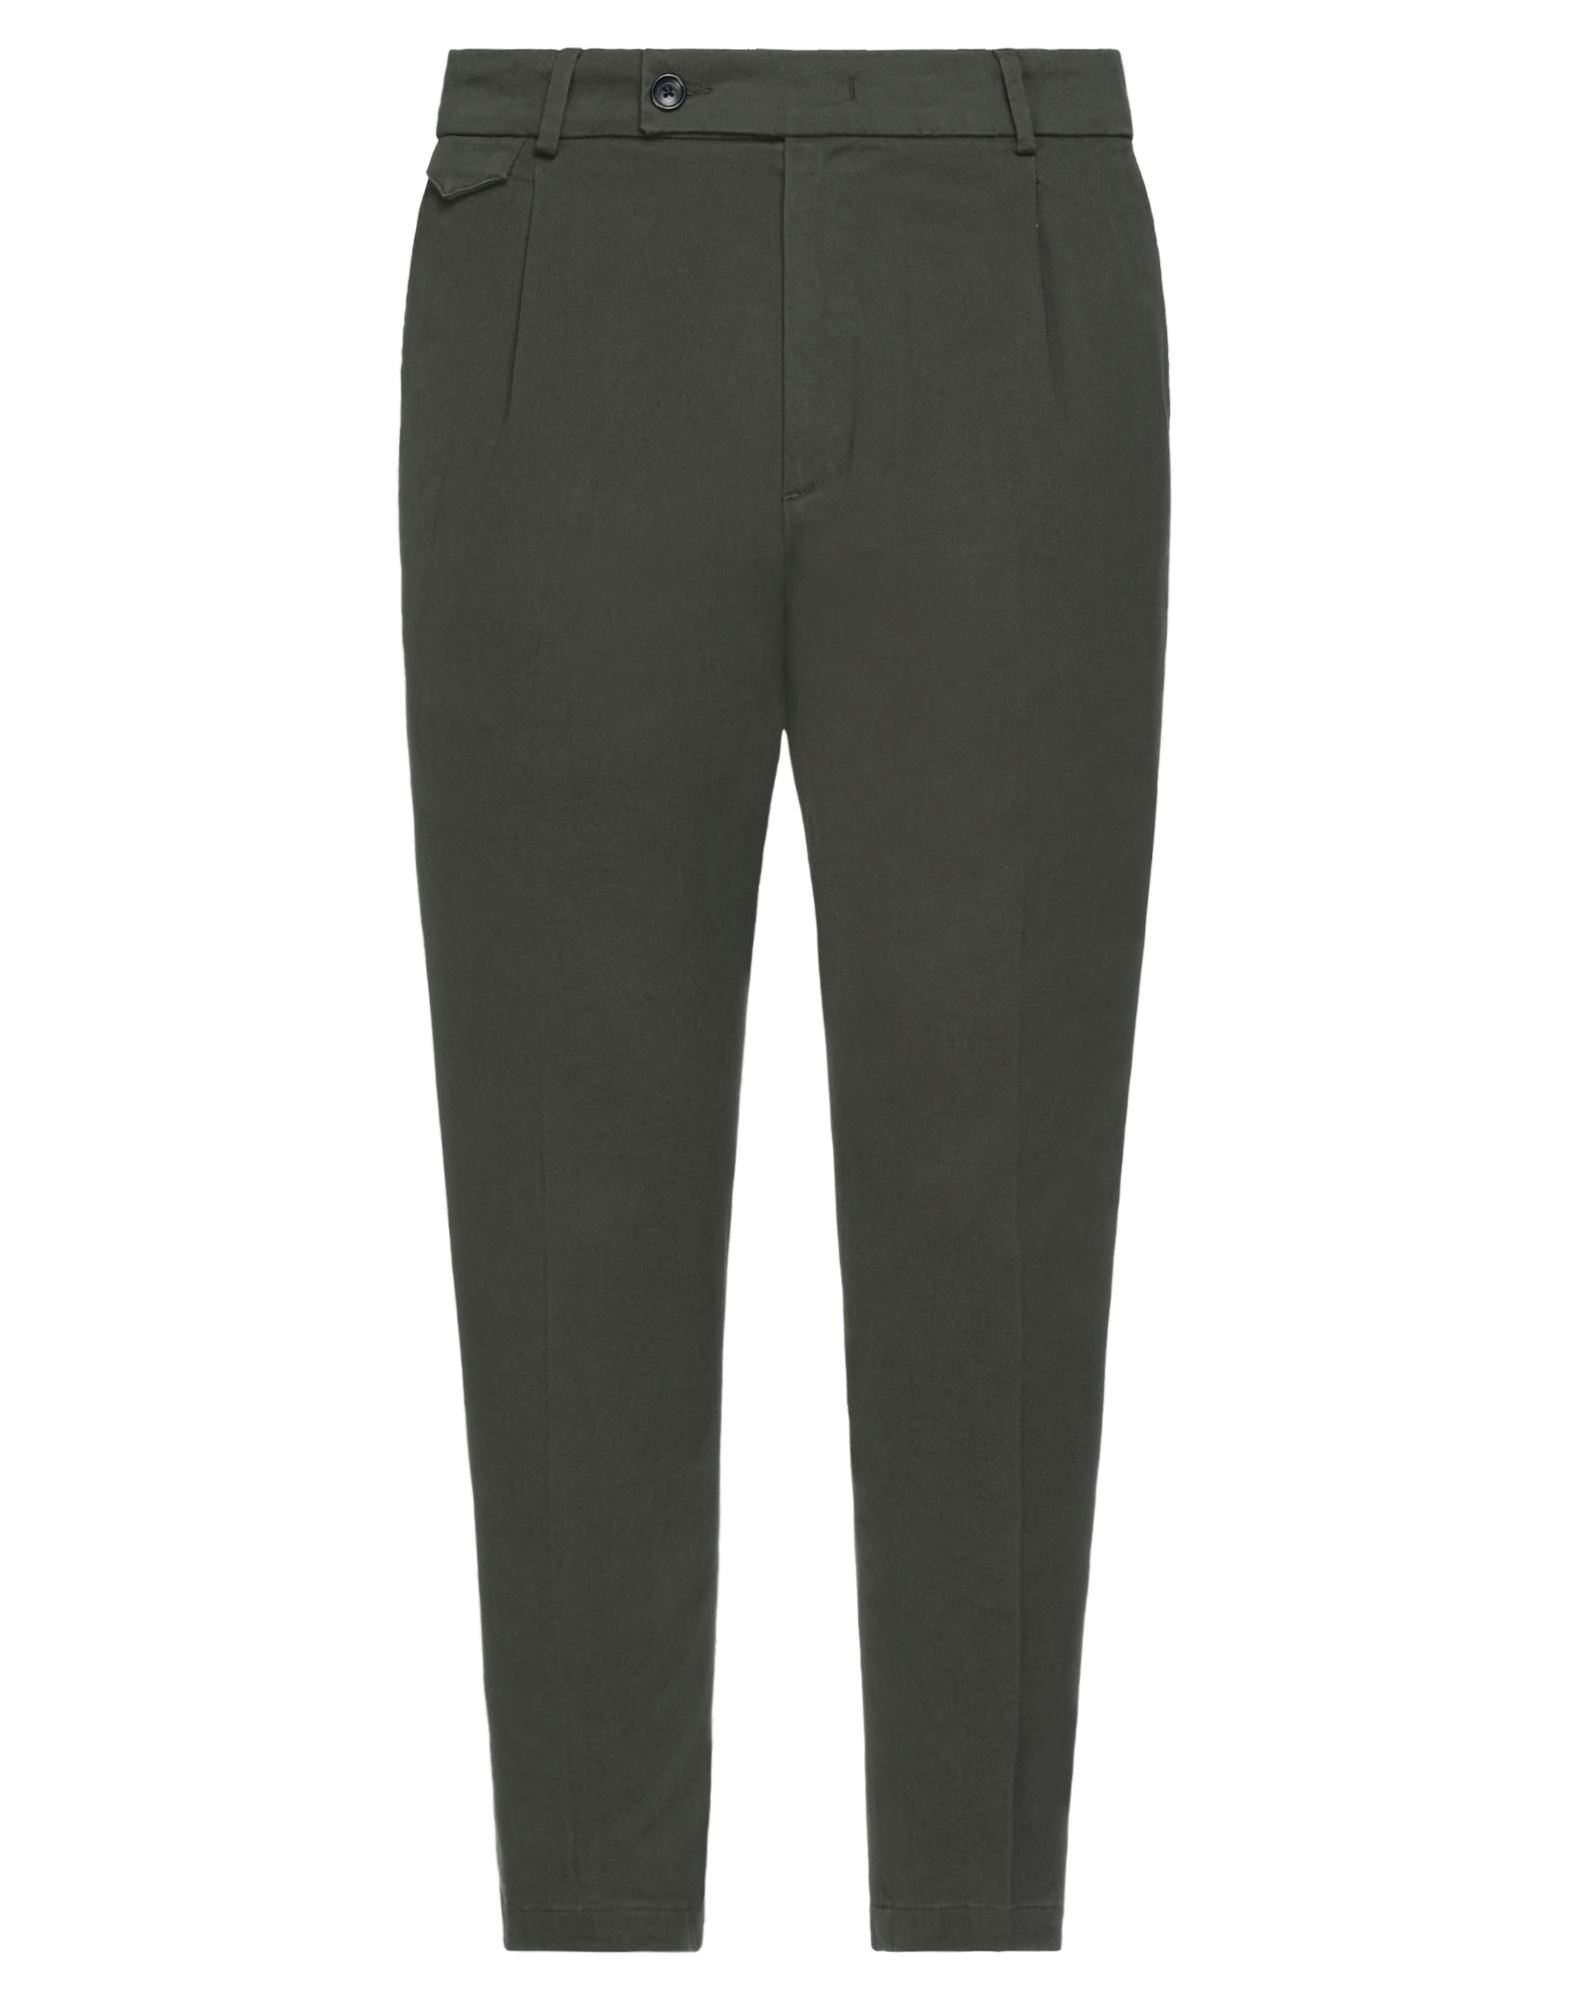 Golden Craft 1957 Pants In Military Green